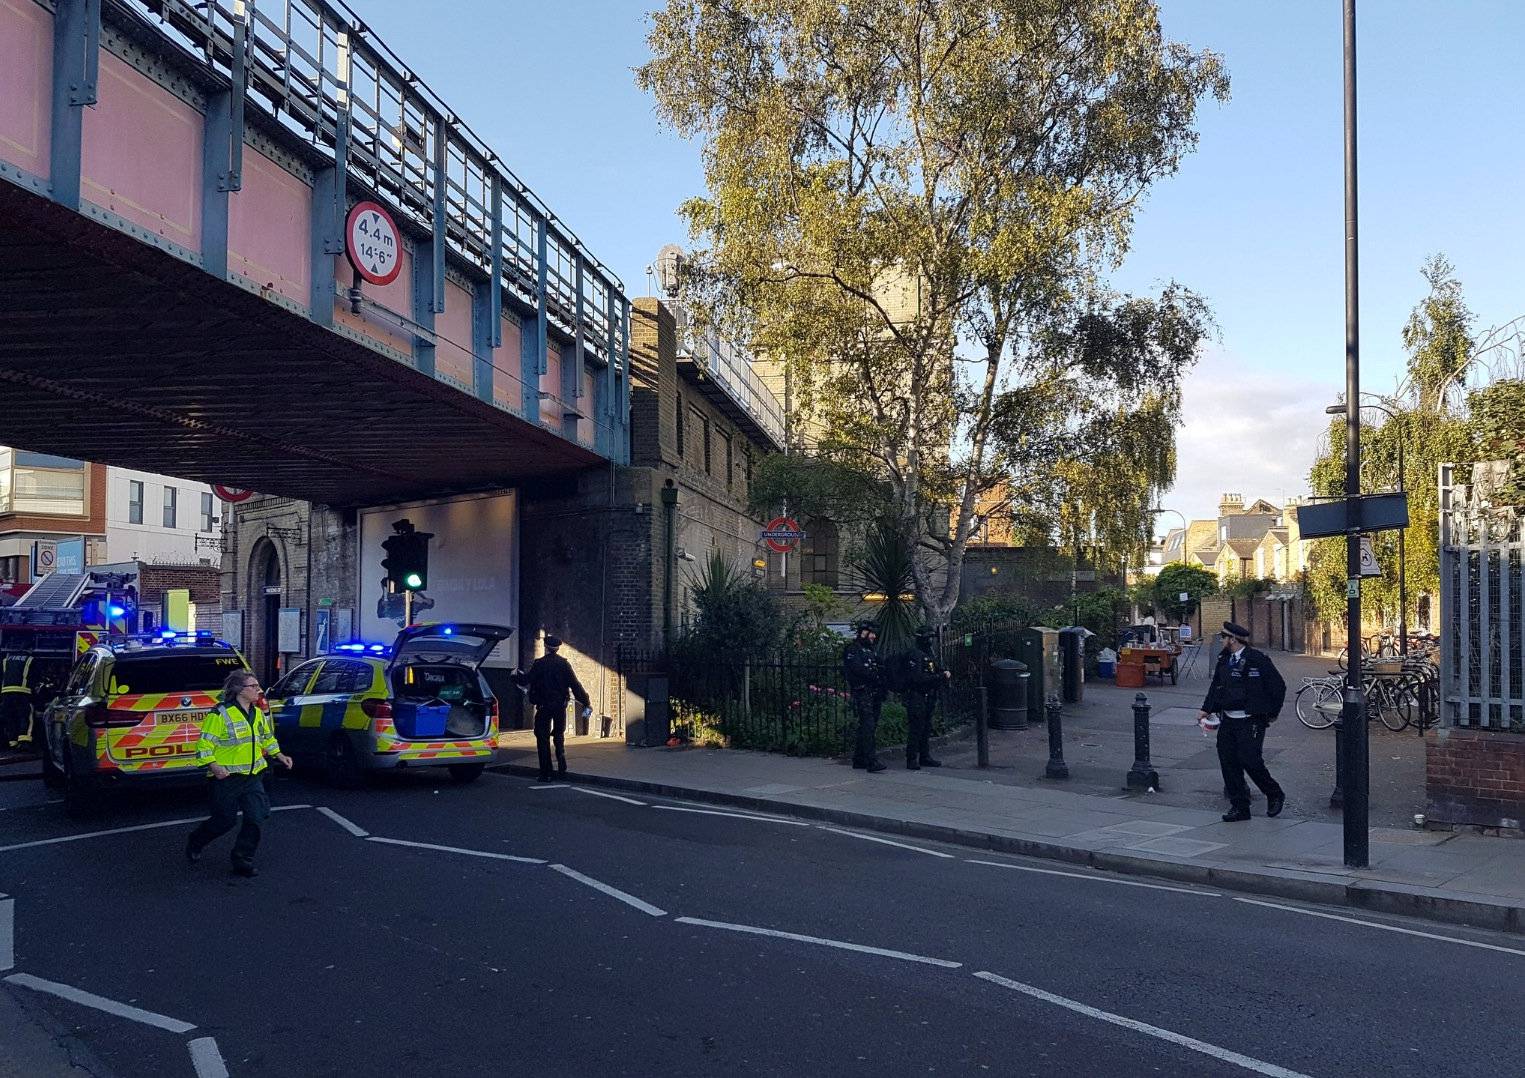 Emergency services attend the scene following a blast on an underground train at Parsons Green station in West London